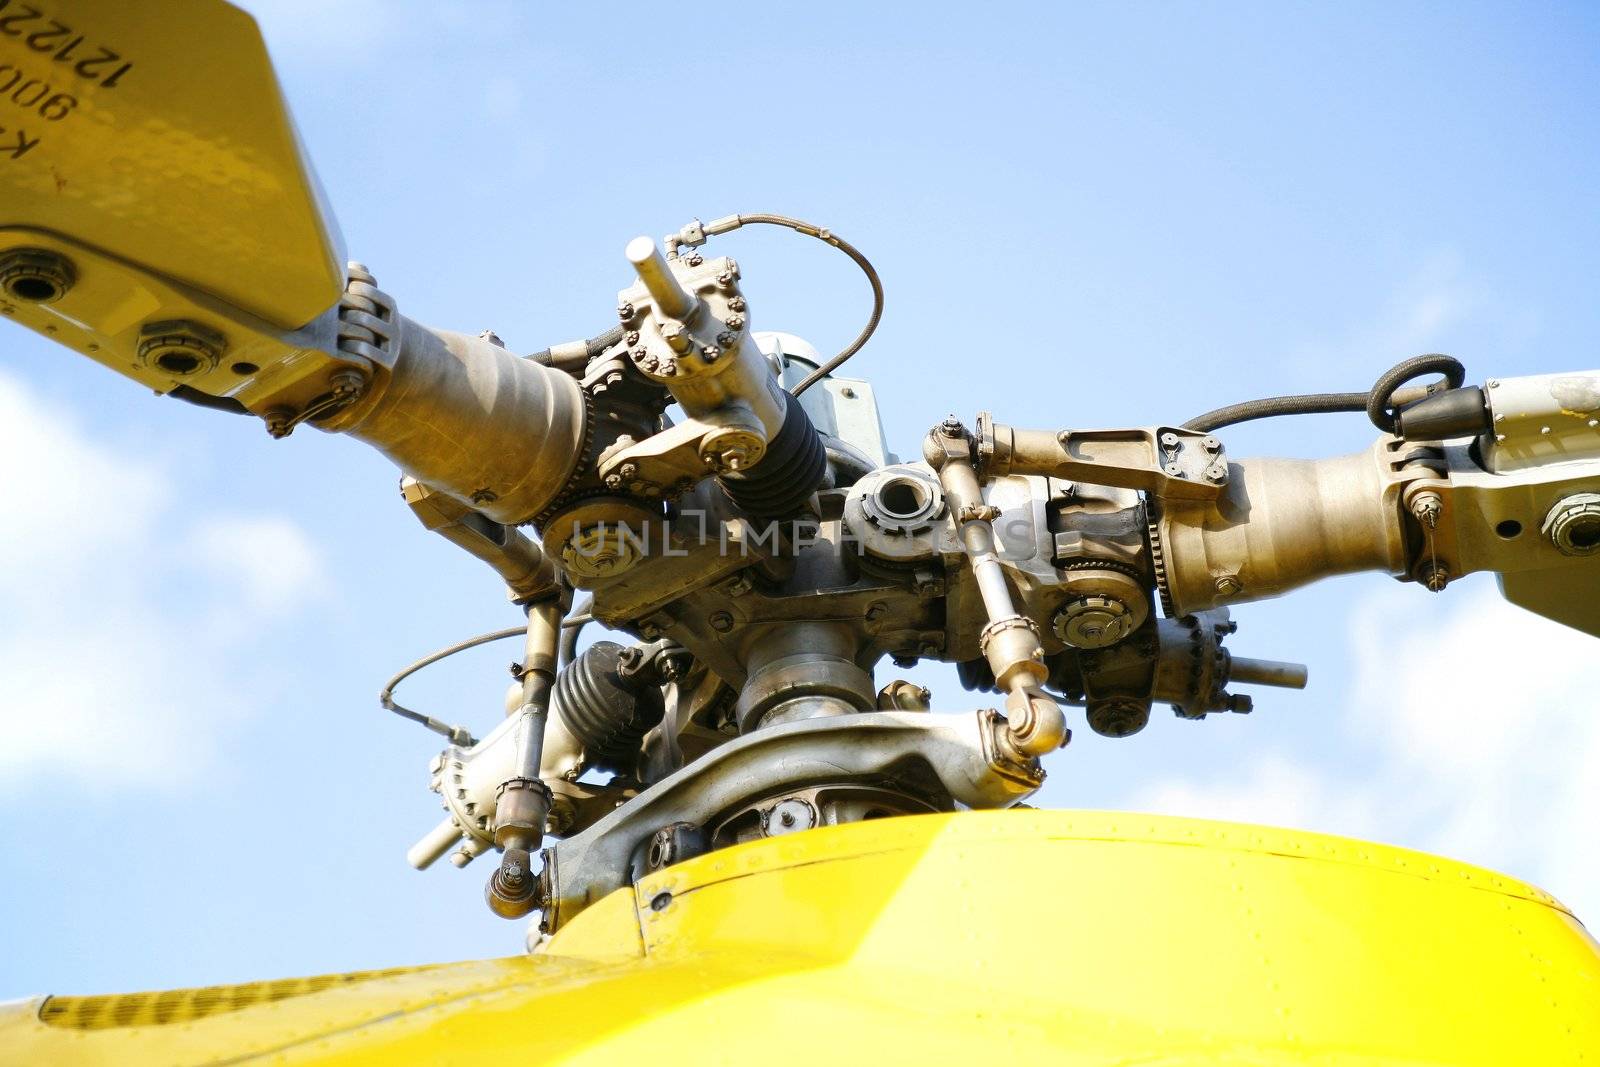 close-up of rotor and engine of rescue helicopter